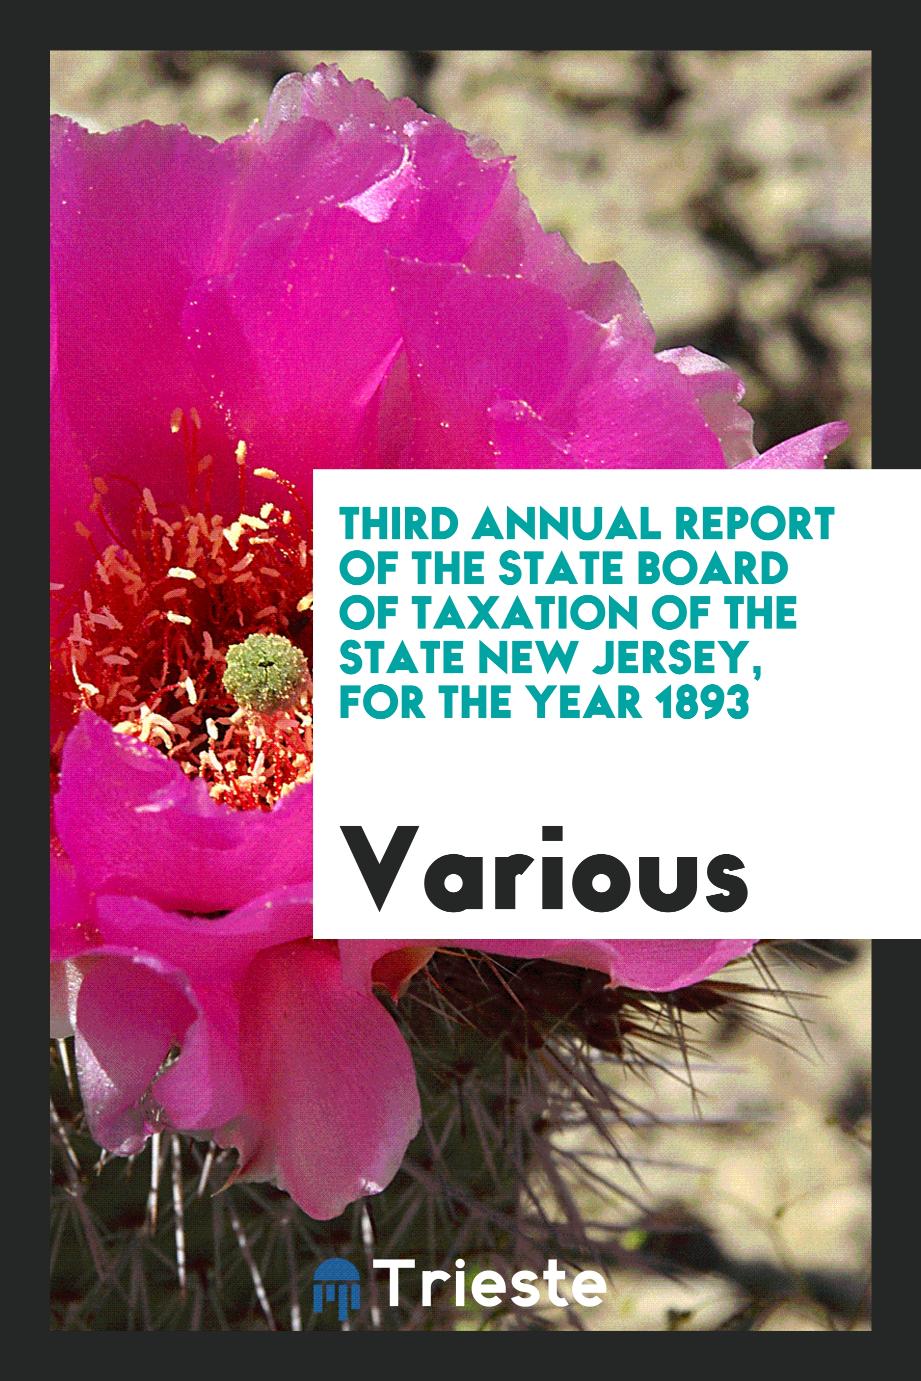 Third Annual Report of the State Board of Taxation of the State New Jersey, for the Year 1893